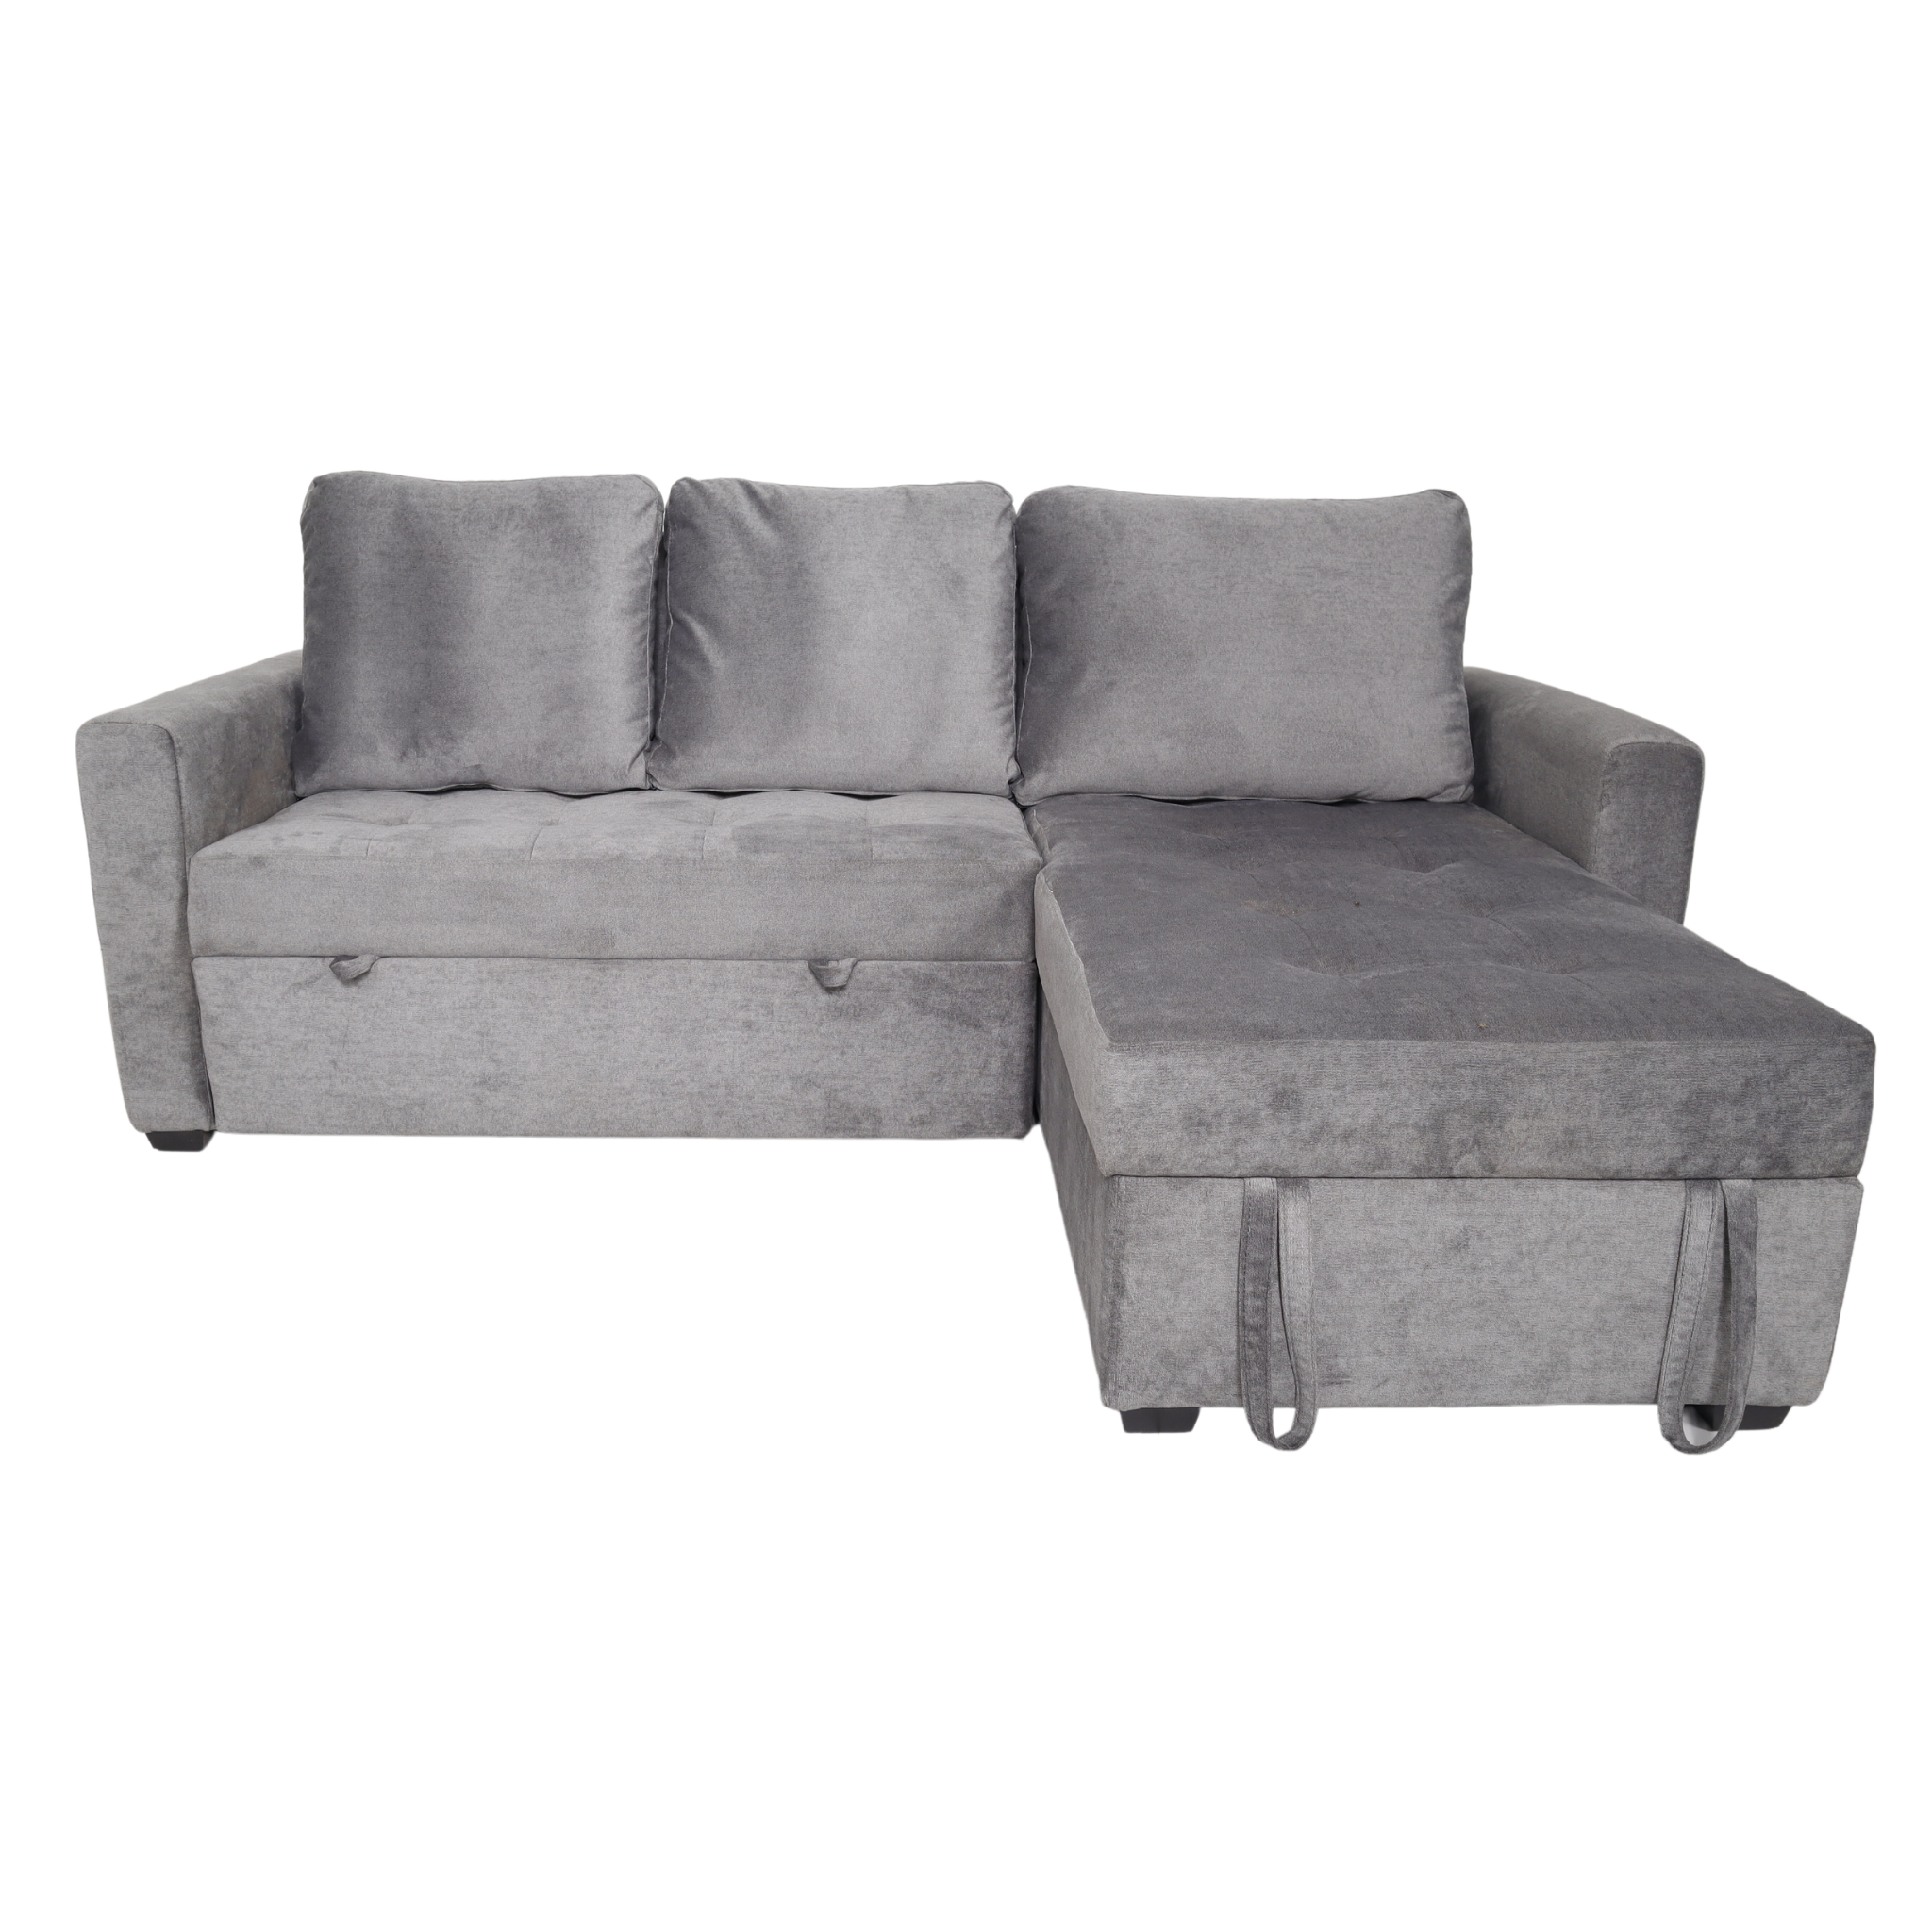 DARCY Sofabed with Storage Chaise AF Home